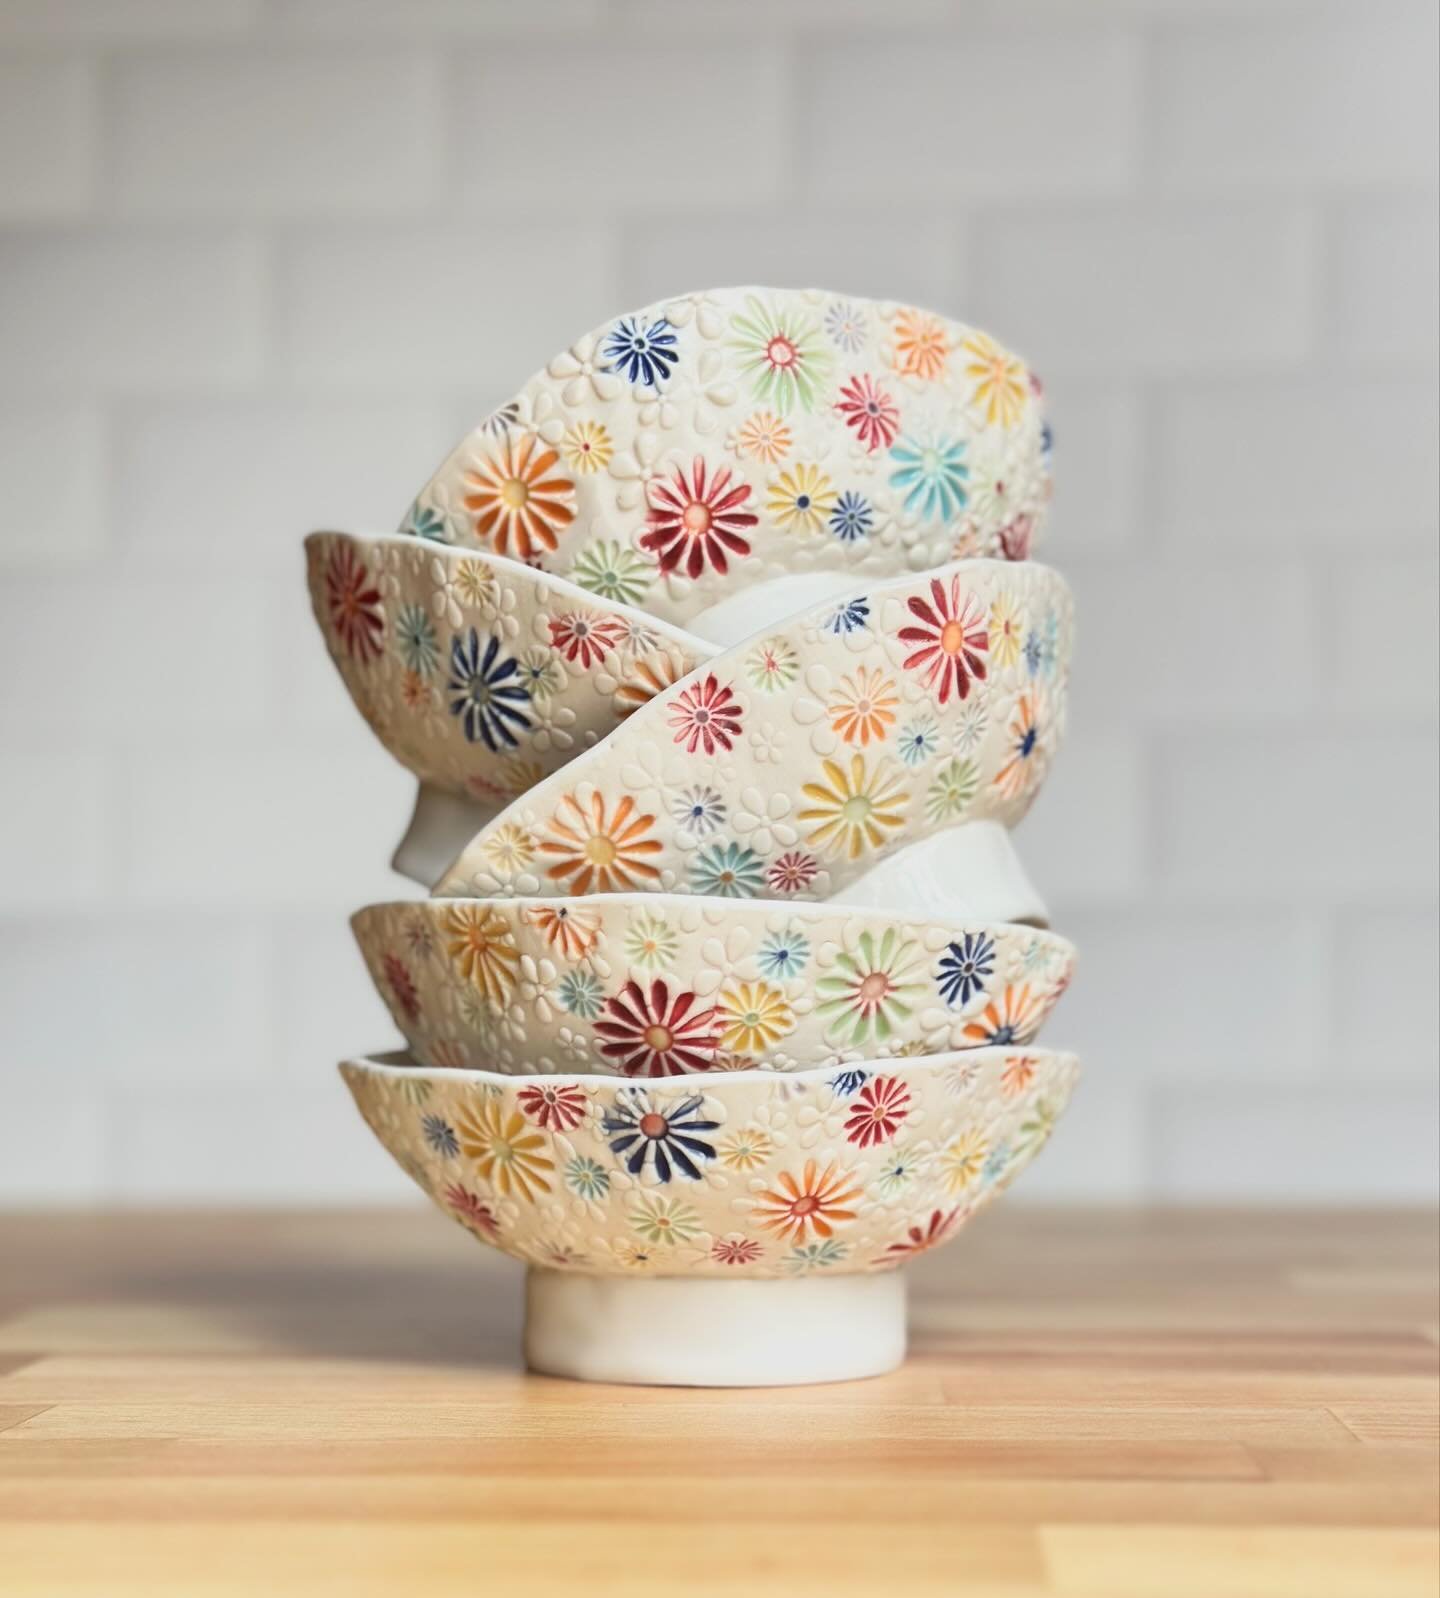 &ldquo;Daisyware&rdquo; ice cream bowls coming this Friday!  I love them so!  So cheerful!  So colorful!  So lightweight!  What kind of ice cream is your favorite?  I love Haagen Dazs strawberry, Ben &amp; Jerry&rsquo;s Toffee Coffee or Chubby Hubby,